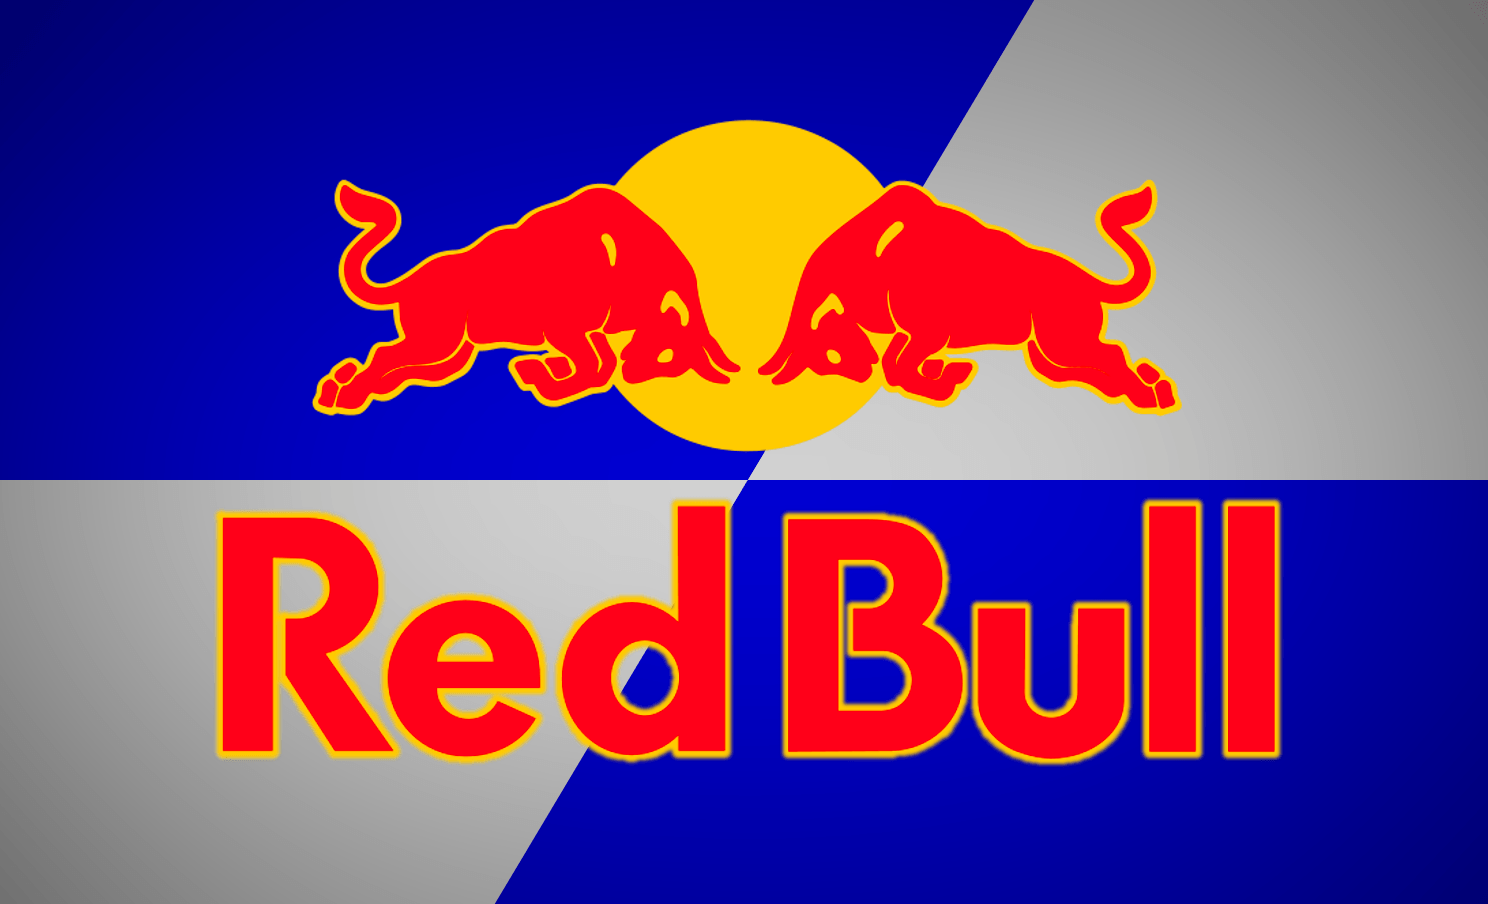 Blue White and Red Bull Logo - Index of /wp-content/uploads/2018/06